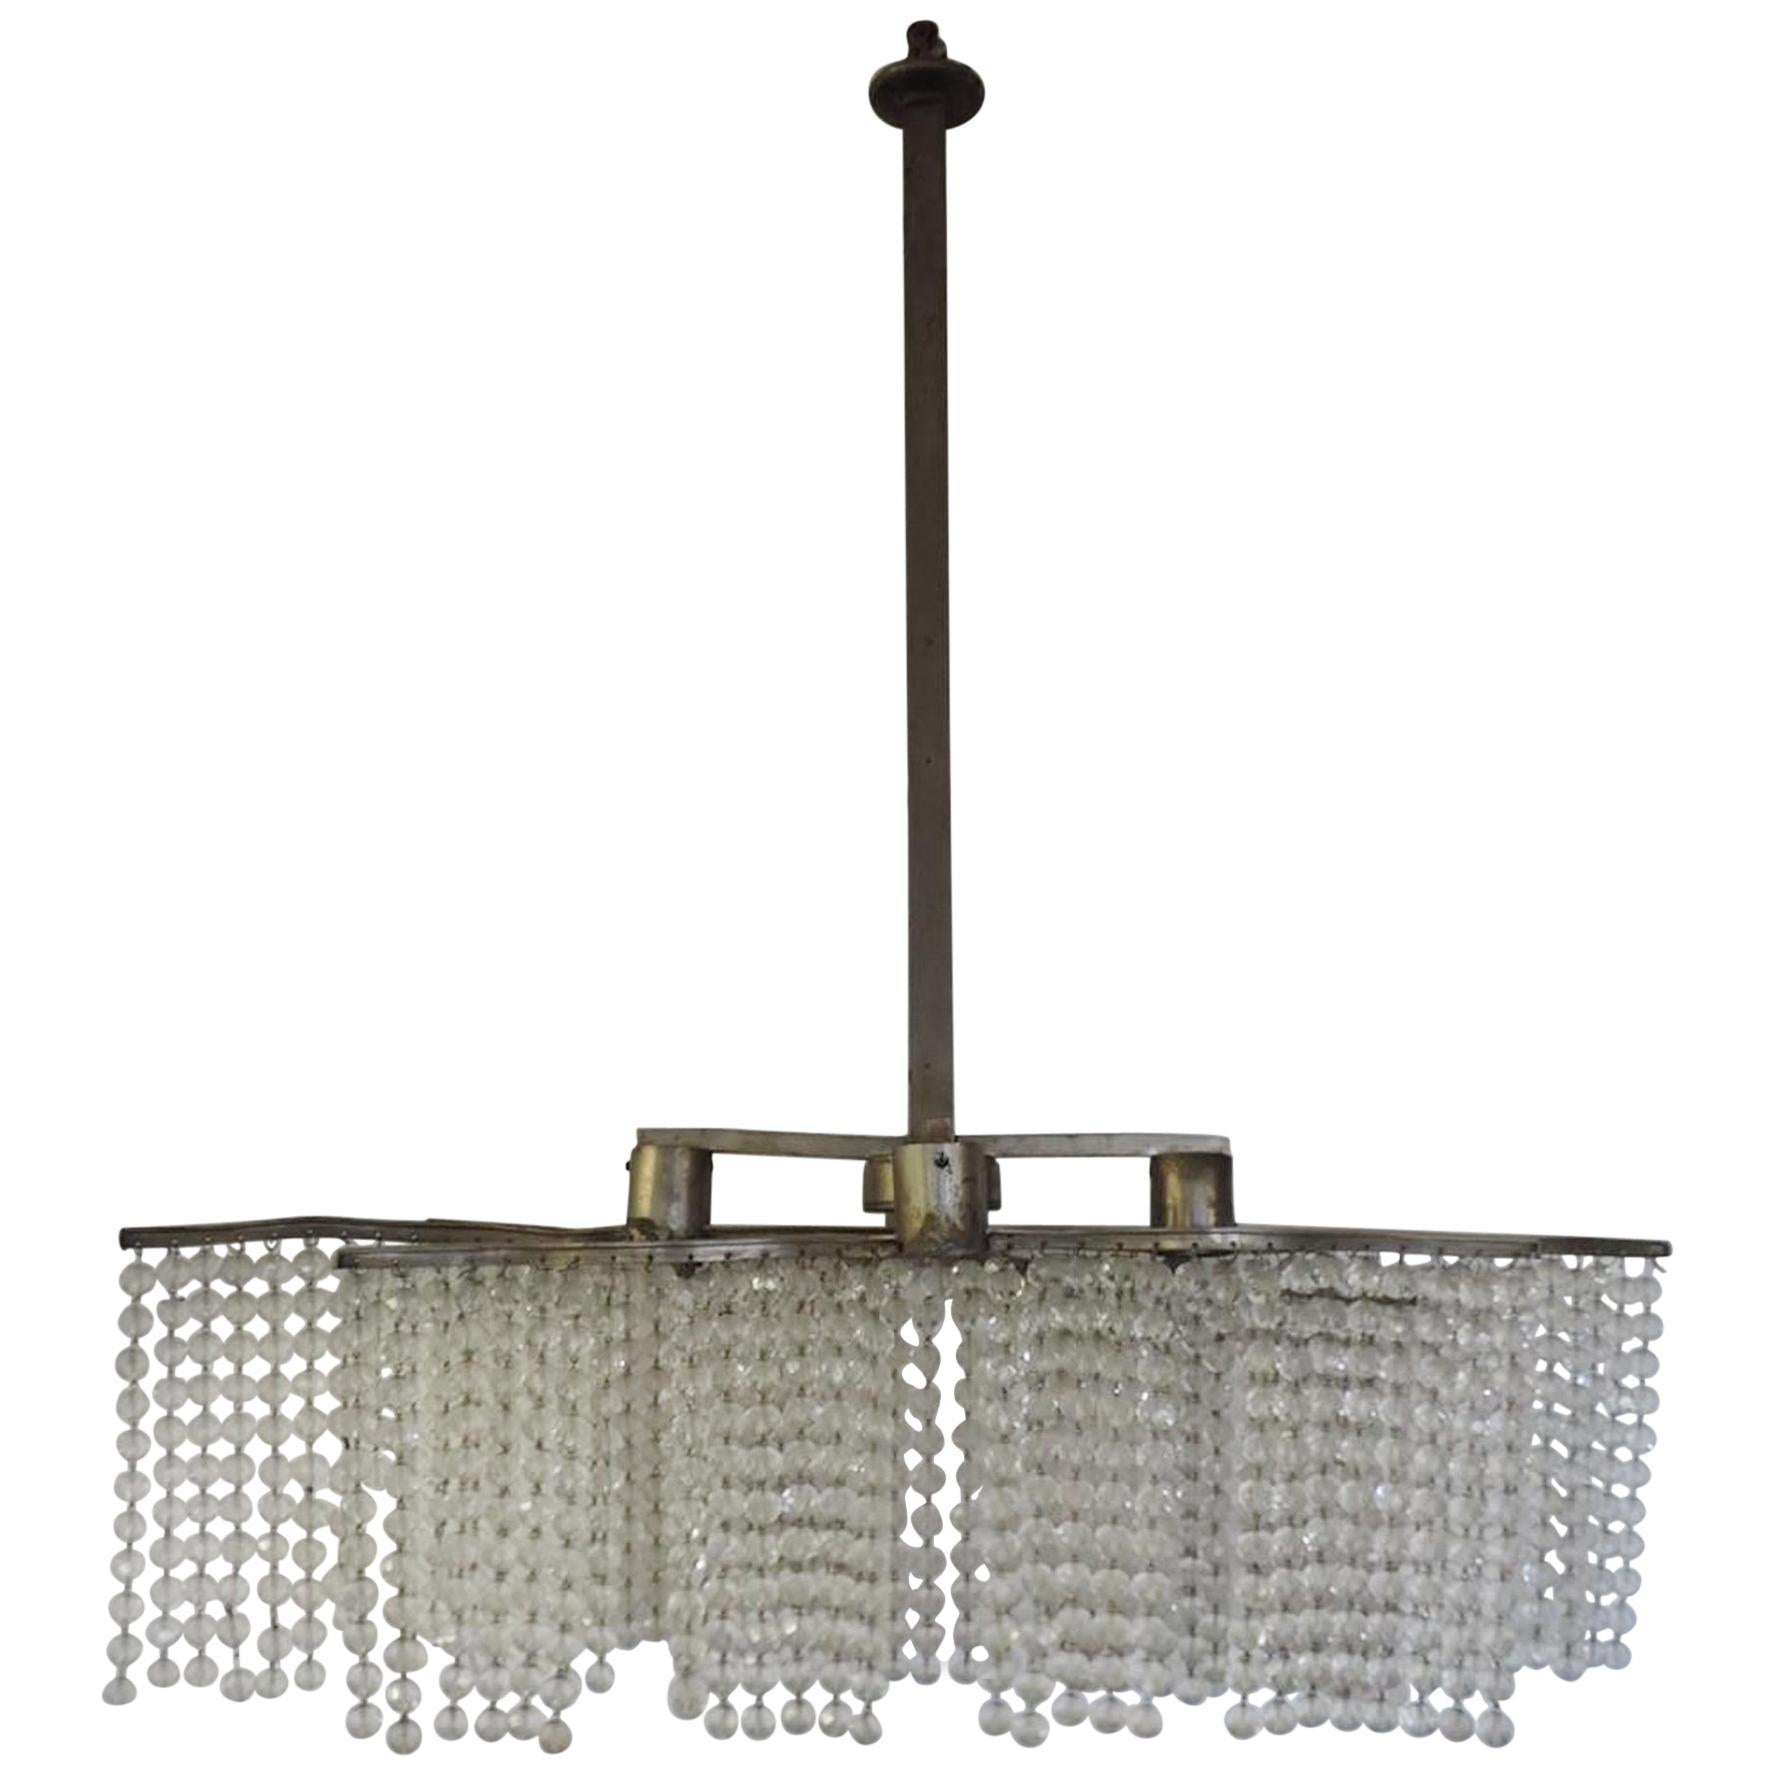 Art Deco Chandelier, Made of Three Fringes of Pearls and Metal, circa 1930 For Sale